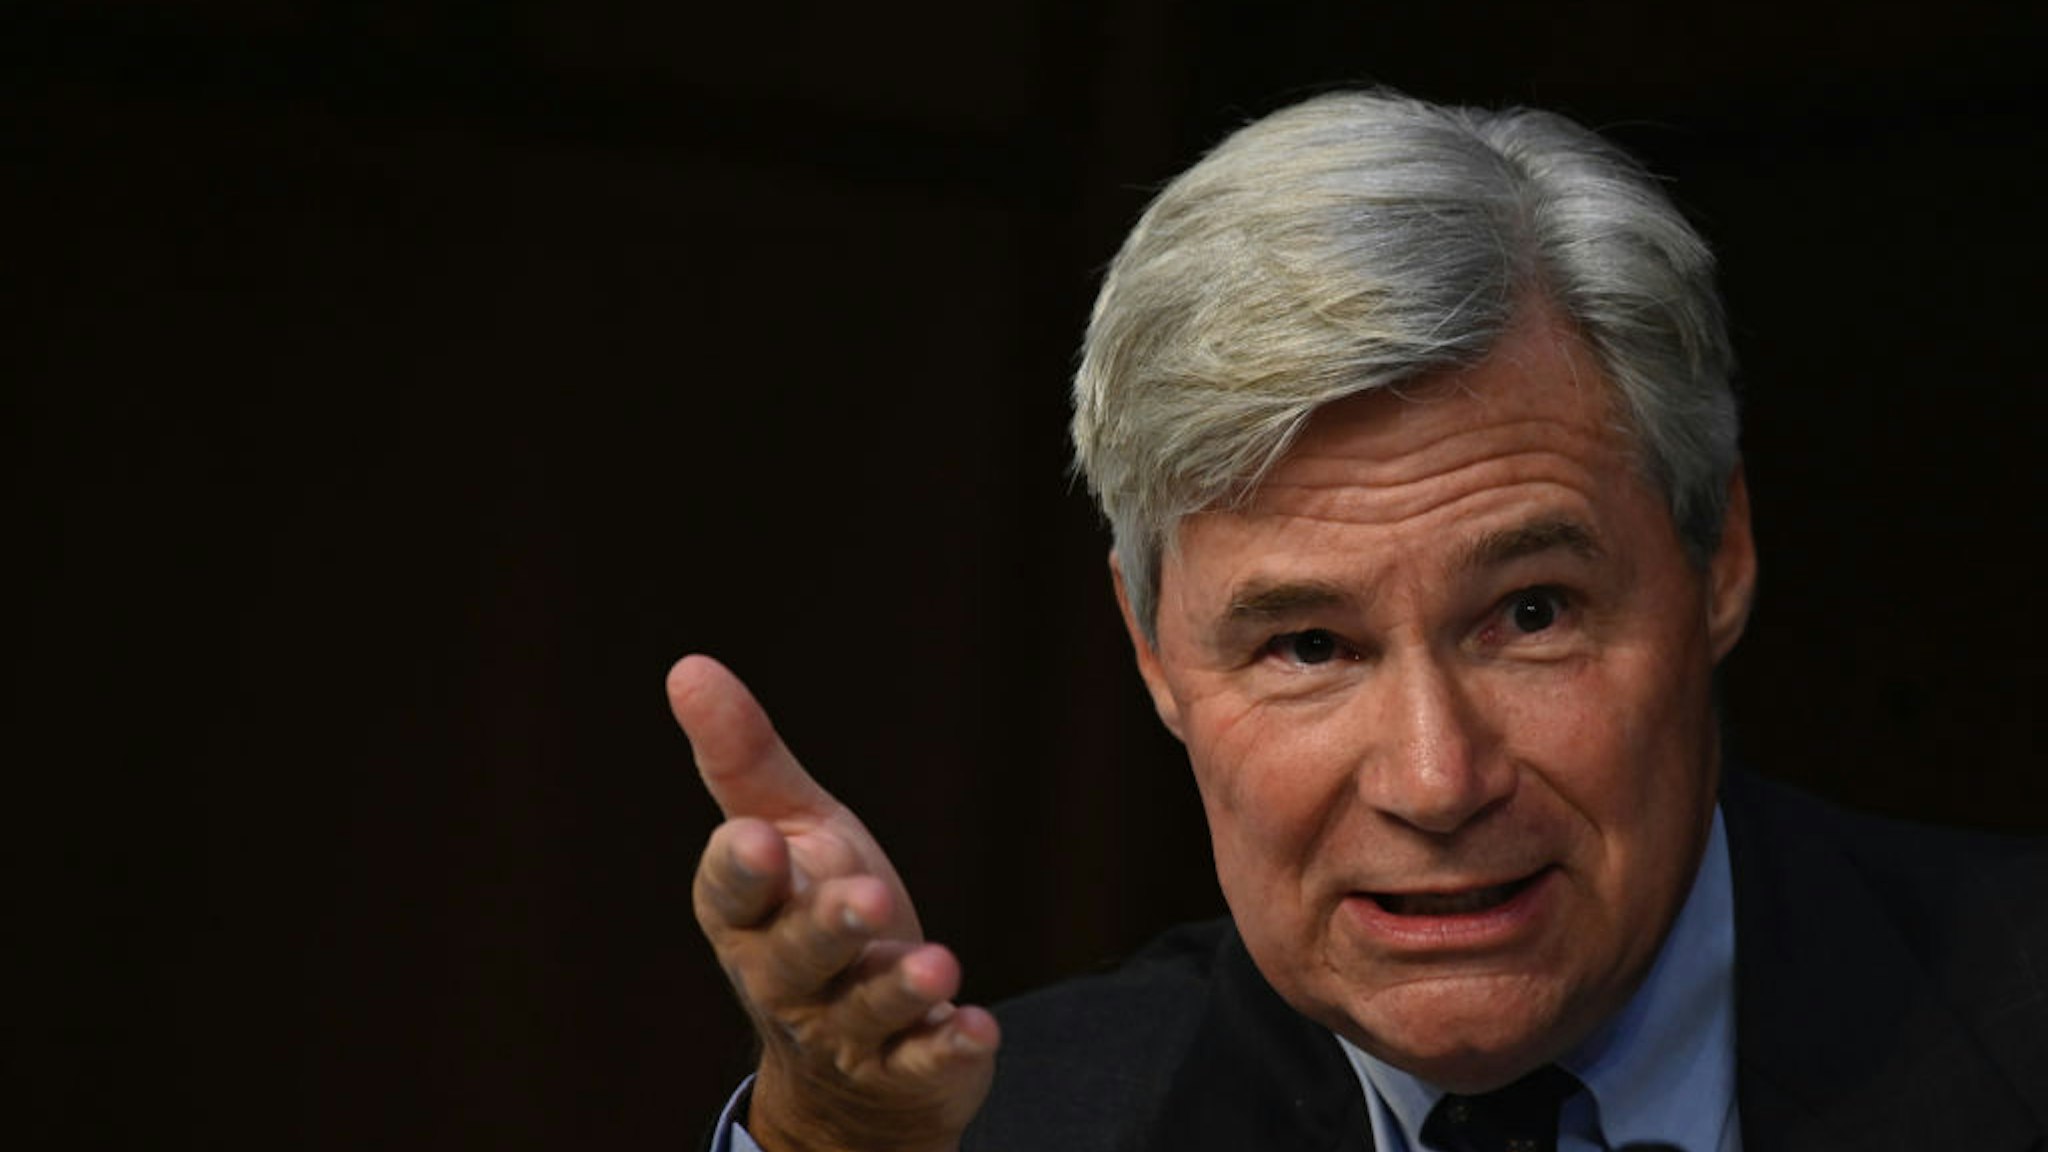 WASHINGTON, DC - OCTOBER 14: U.S. Sen. Sheldon Whitehouse (D-RI) questions Supreme Court nominee Judge Amy Coney Barrett as she testifies before the Senate Judiciary Committee on the third day of her Supreme Court confirmation hearing on Capitol Hill on October 14, 2020 in Washington, DC. Barrett was nominated by President Donald Trump to fill the vacancy left by Justice Ruth Bader Ginsburg who passed away in September.